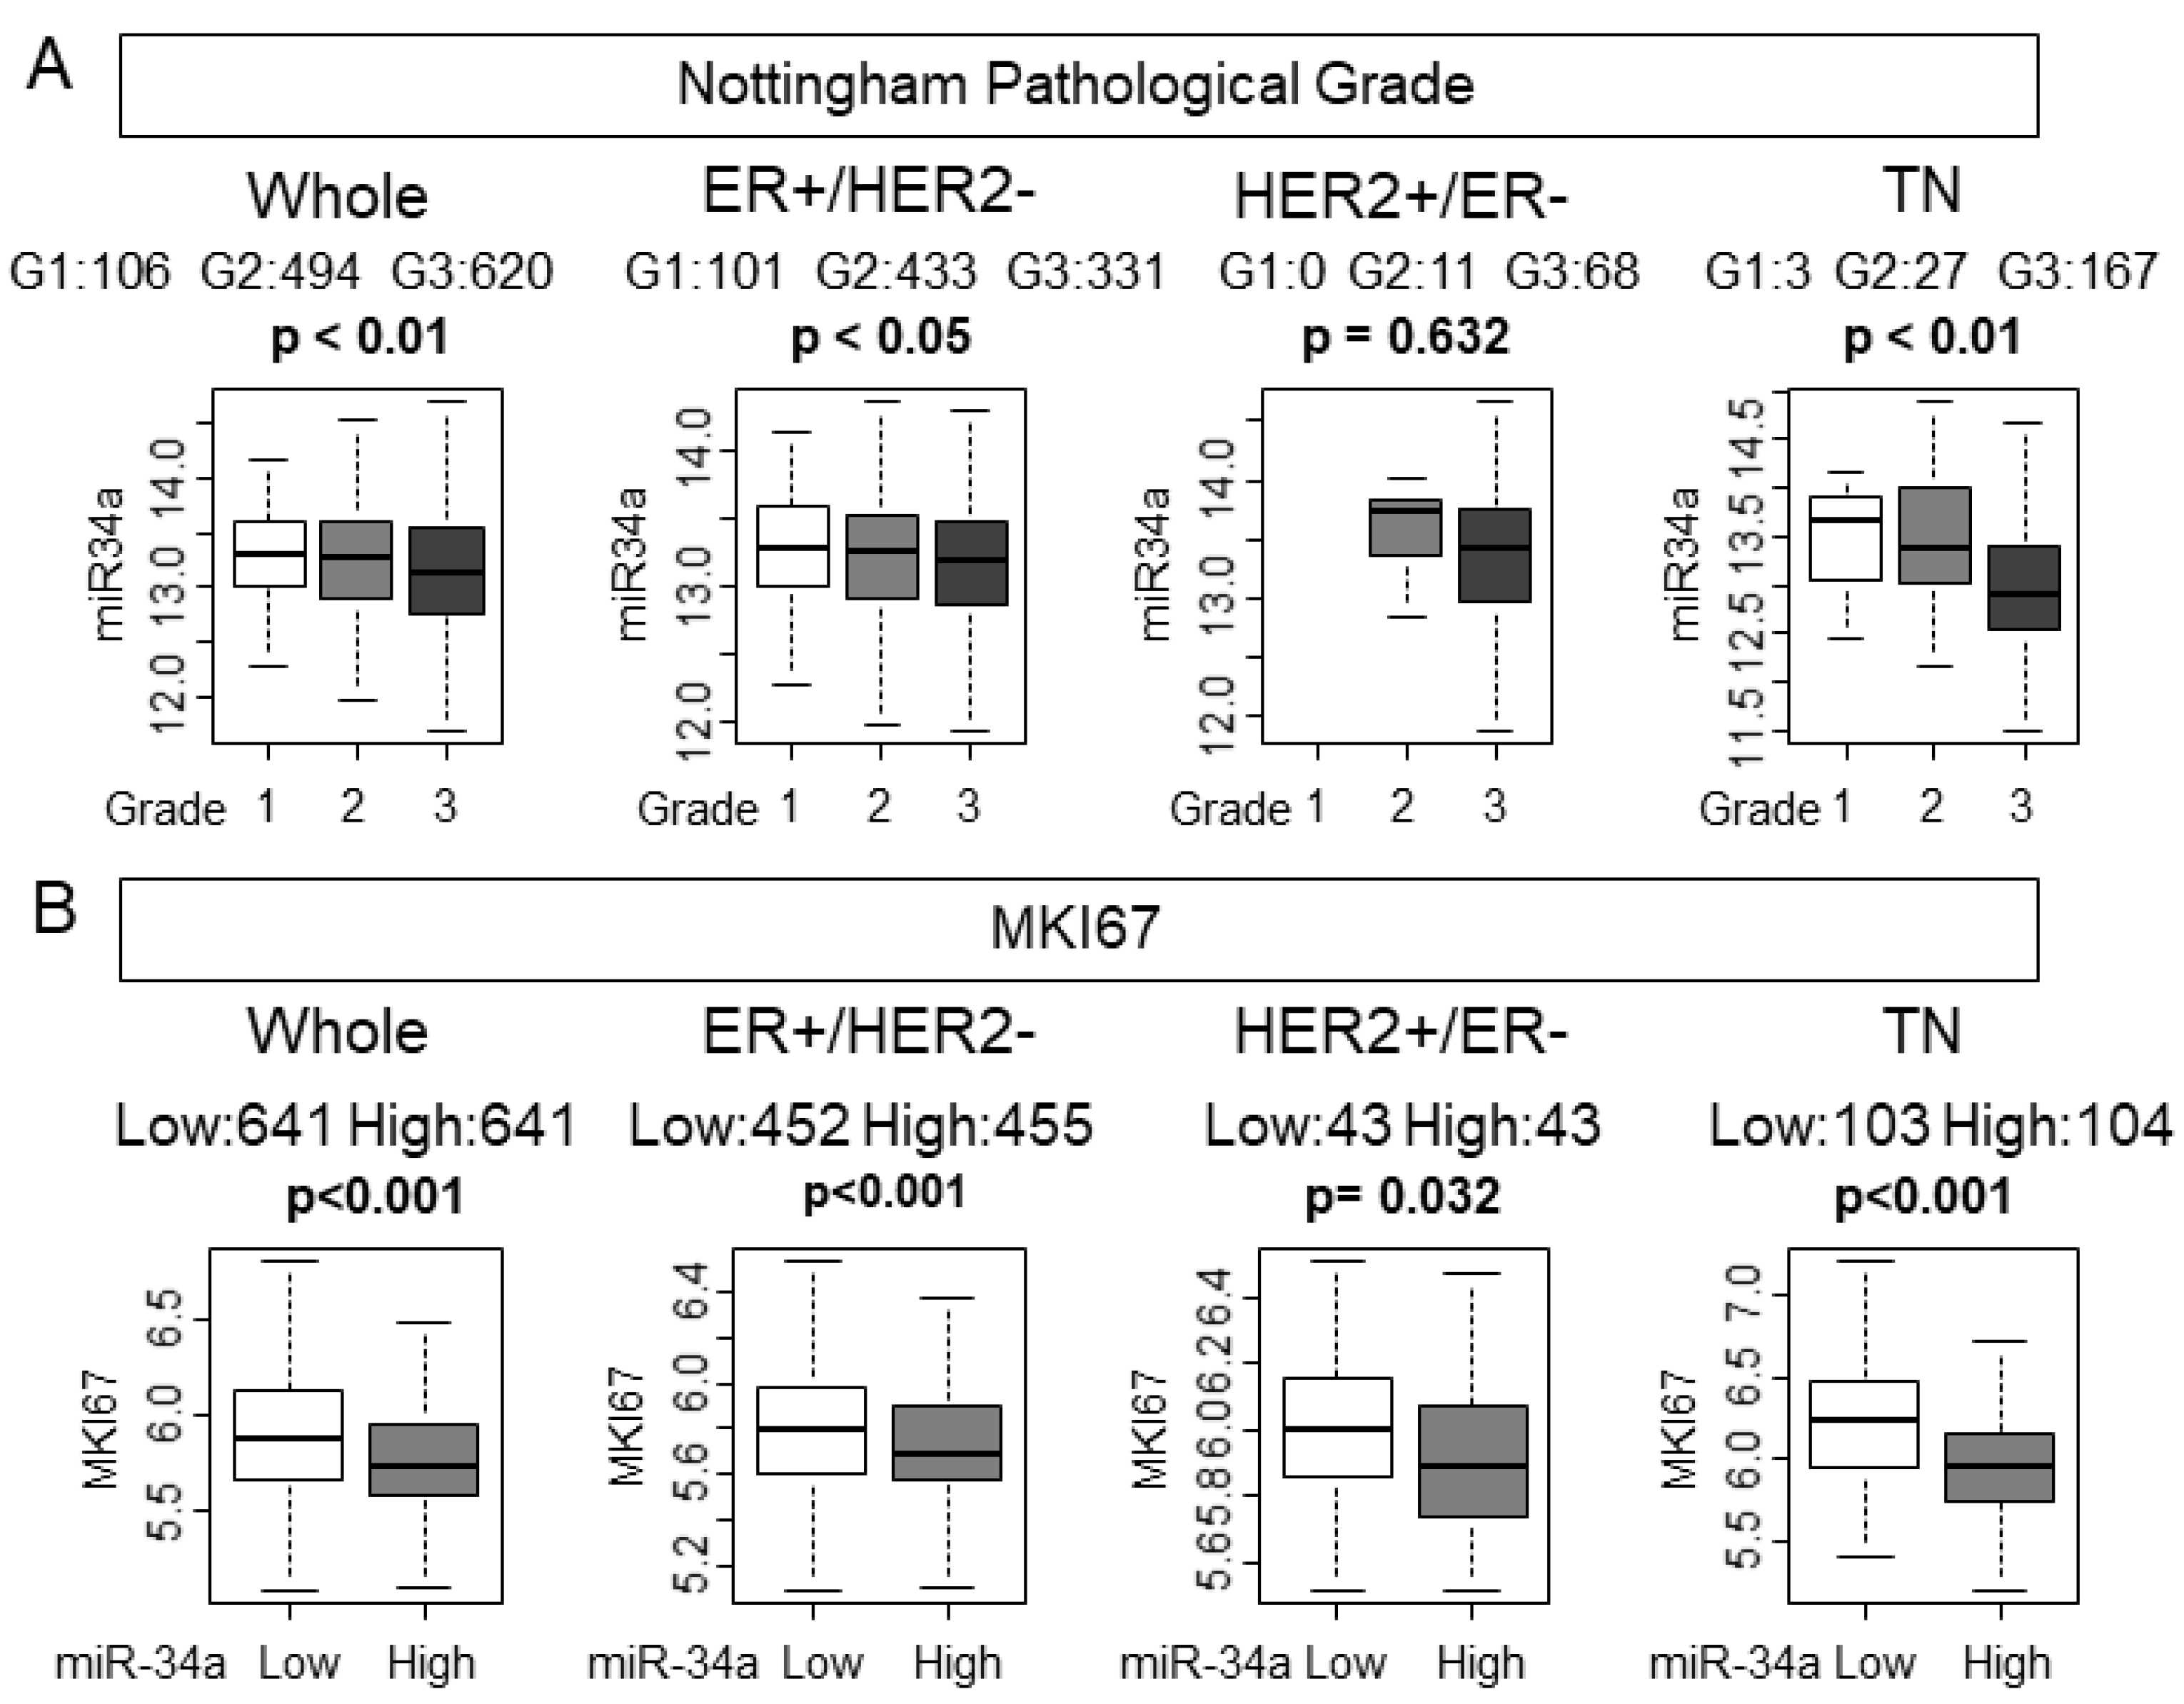 Ijms Free Full Text High Expression Of Mir 34a Associated With Less Aggressive Cancer Biology But Not With Survival In Breast Cancer Html